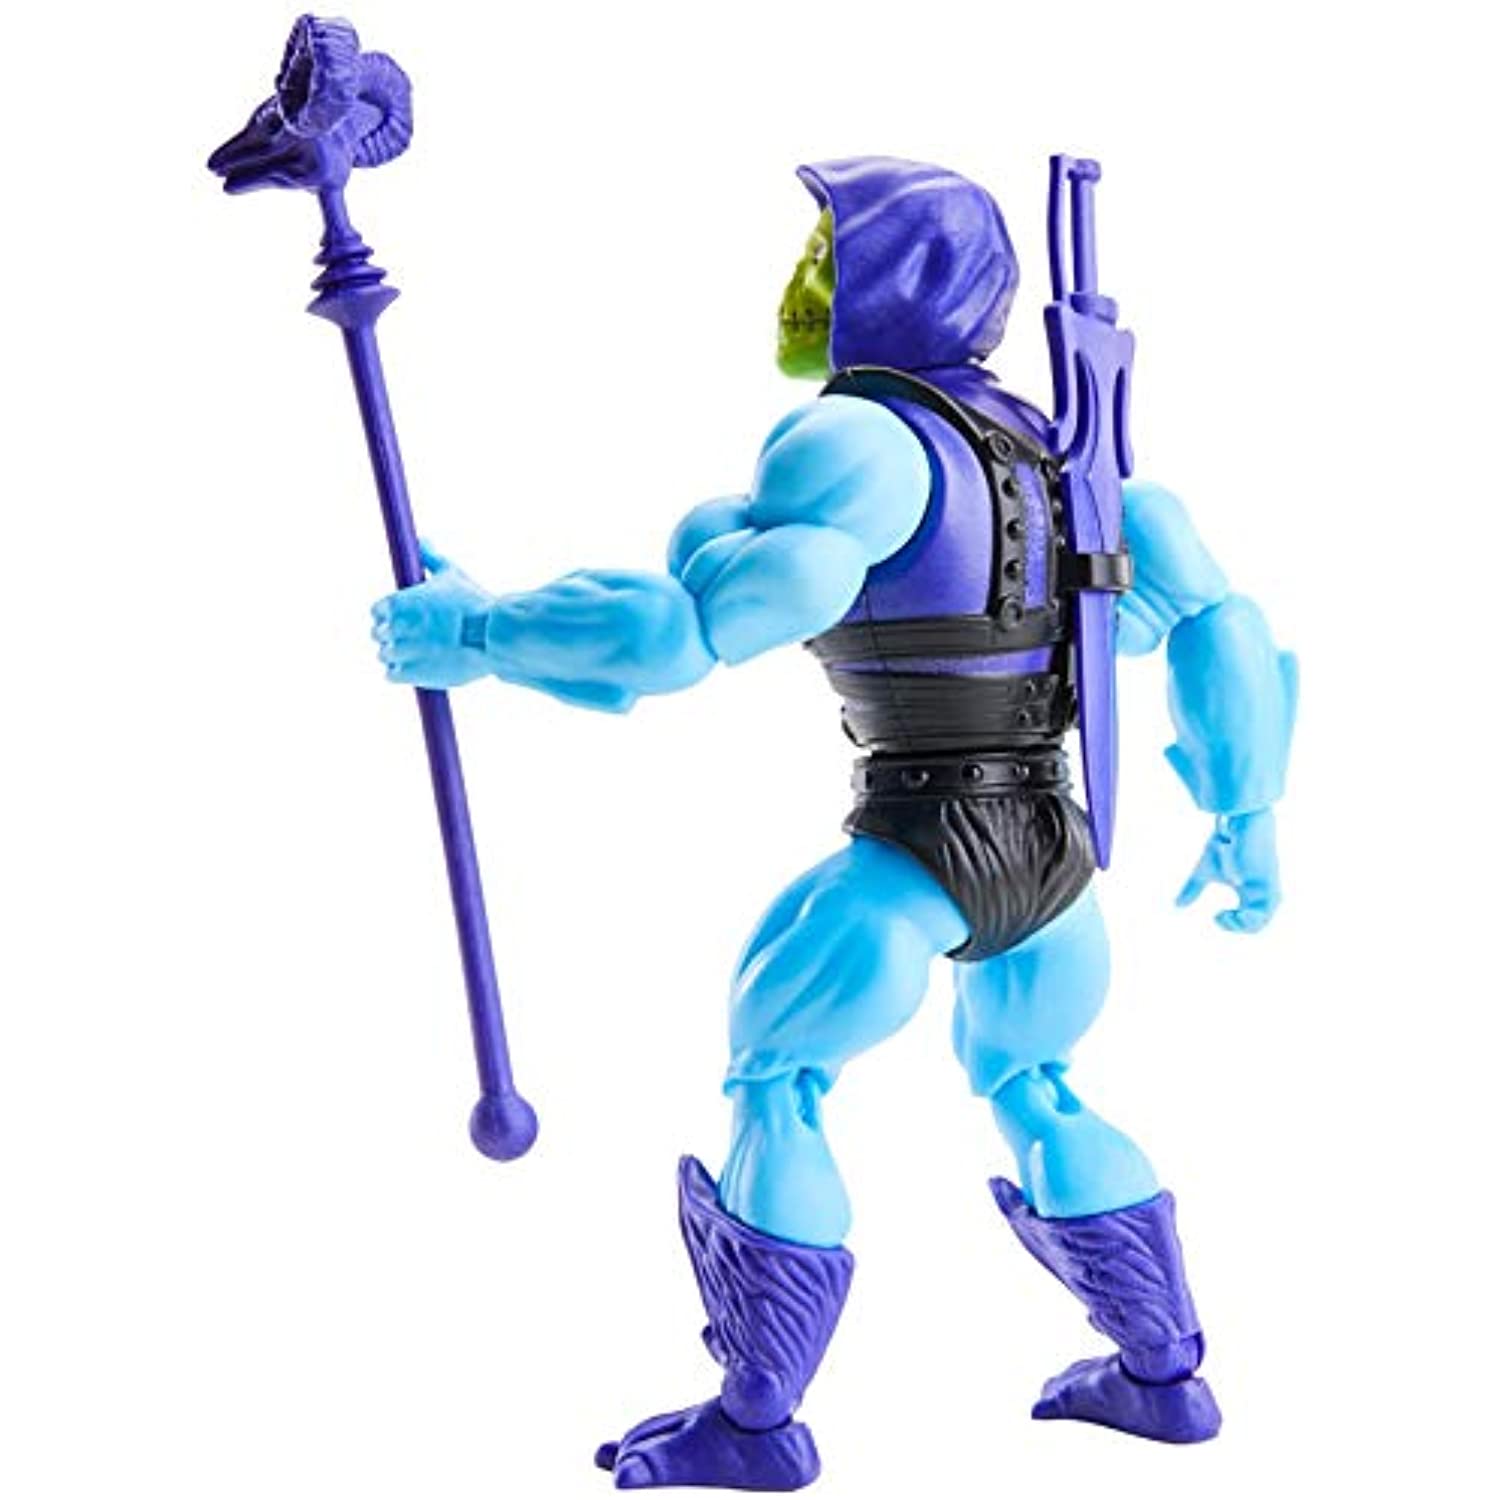 Masters of the Universe Origins Deluxe Skeletor Action Figure, 5.5-in Battle Character for Storytelling Play and Display, Gift for 6 to 10-Year-Olds and Adult Collectors